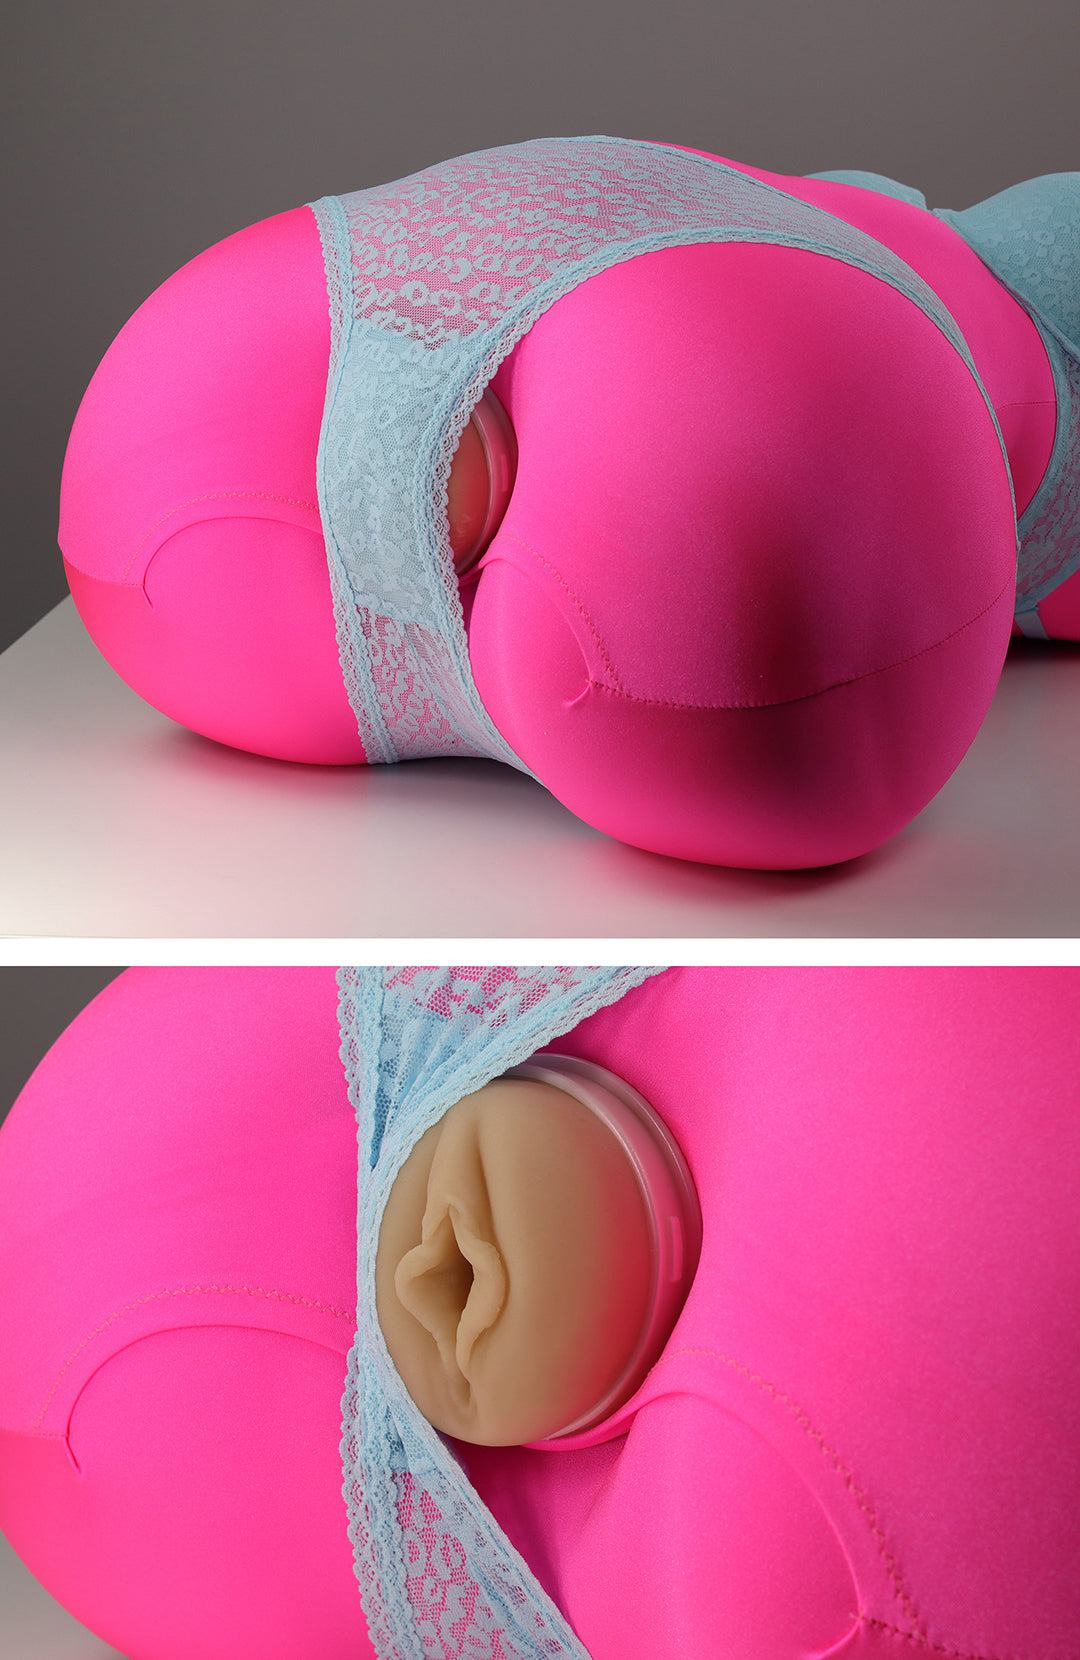 The Nookie Doll sex toy mount is compatible with Fleshlight and a wide range of sex toys, allowing you to explore a variety of sensations and experiences.